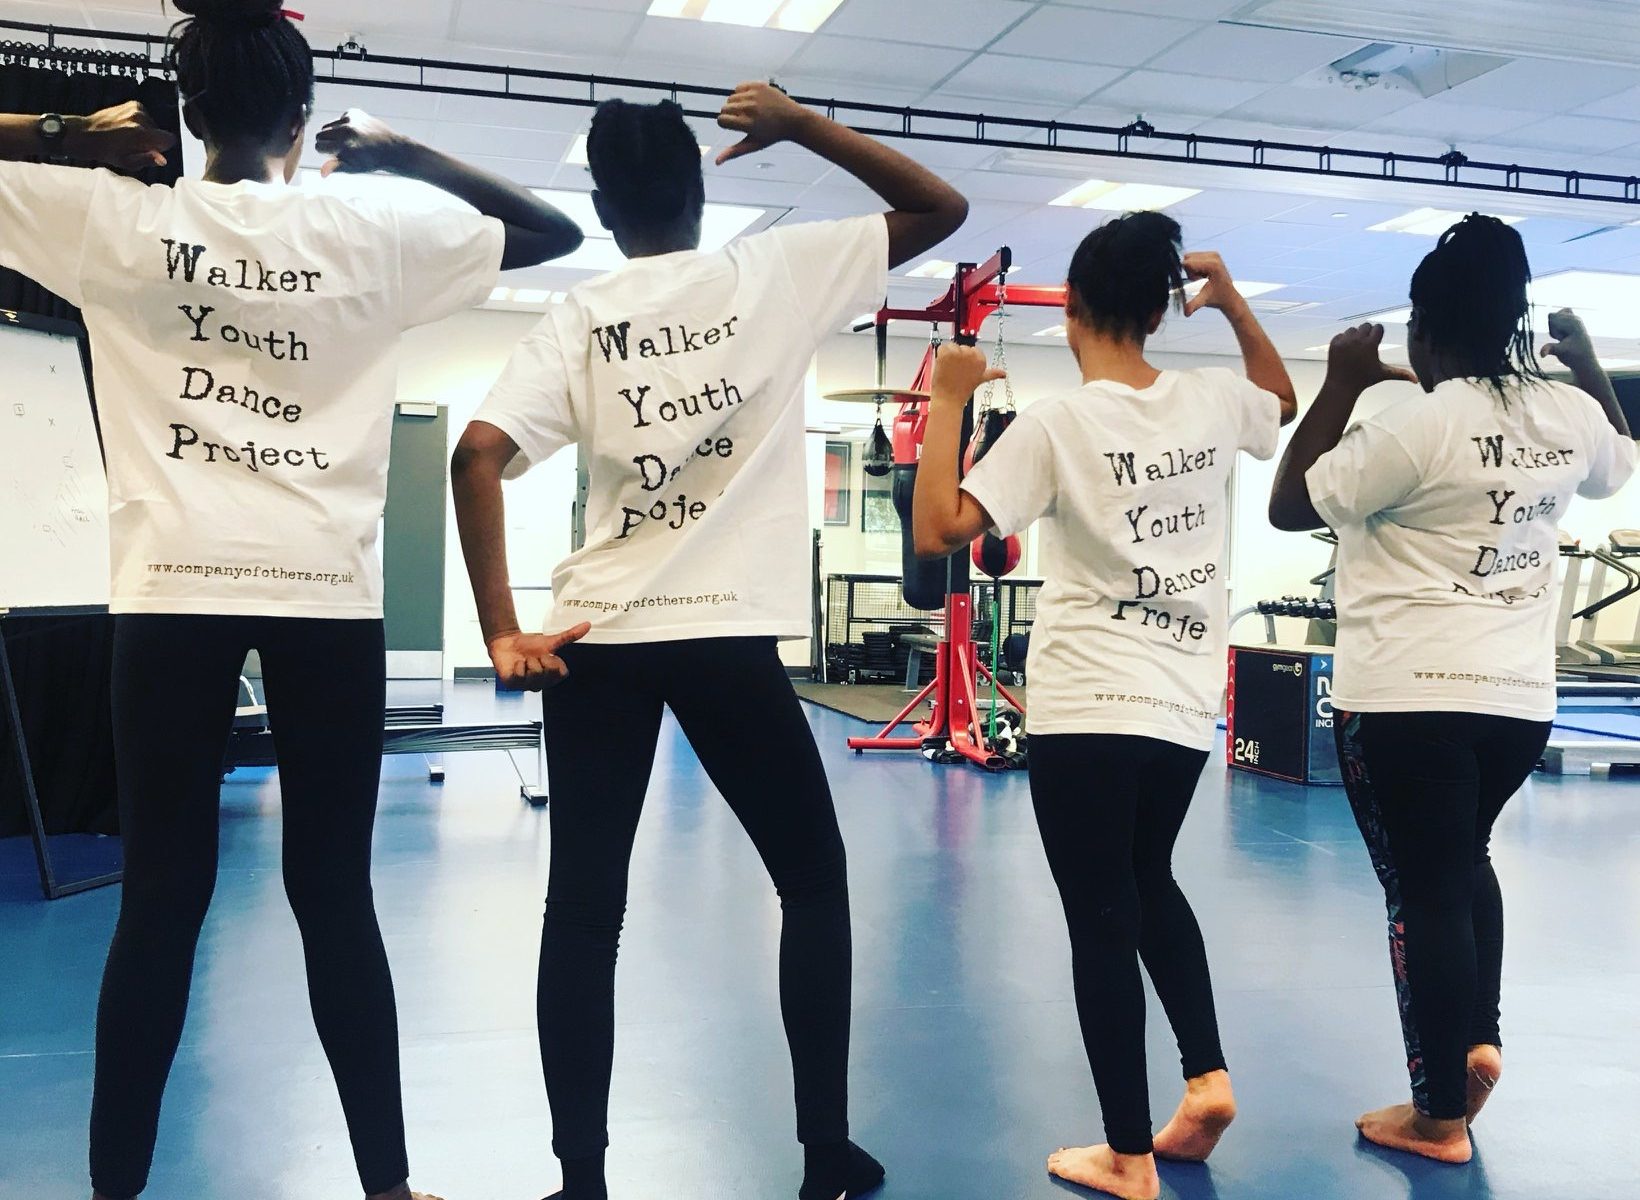 Four walker youth dance project participants. They are facing away from the camera, pointing at their shirts that read 'Walker Youth Dance Project' on the back.